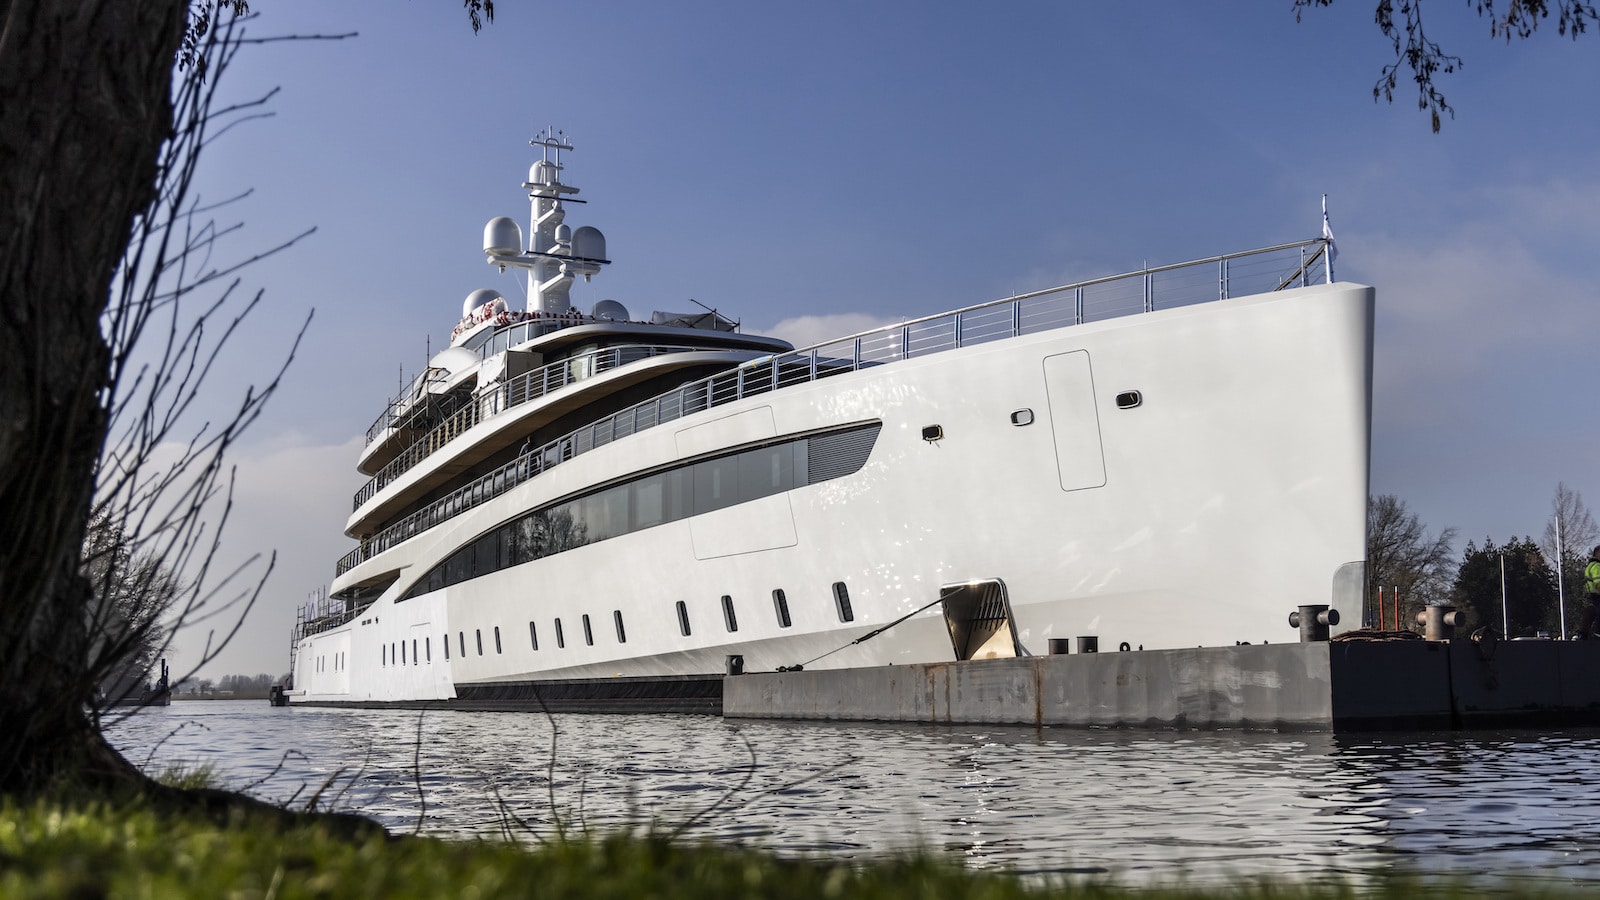 Feadship Project 817